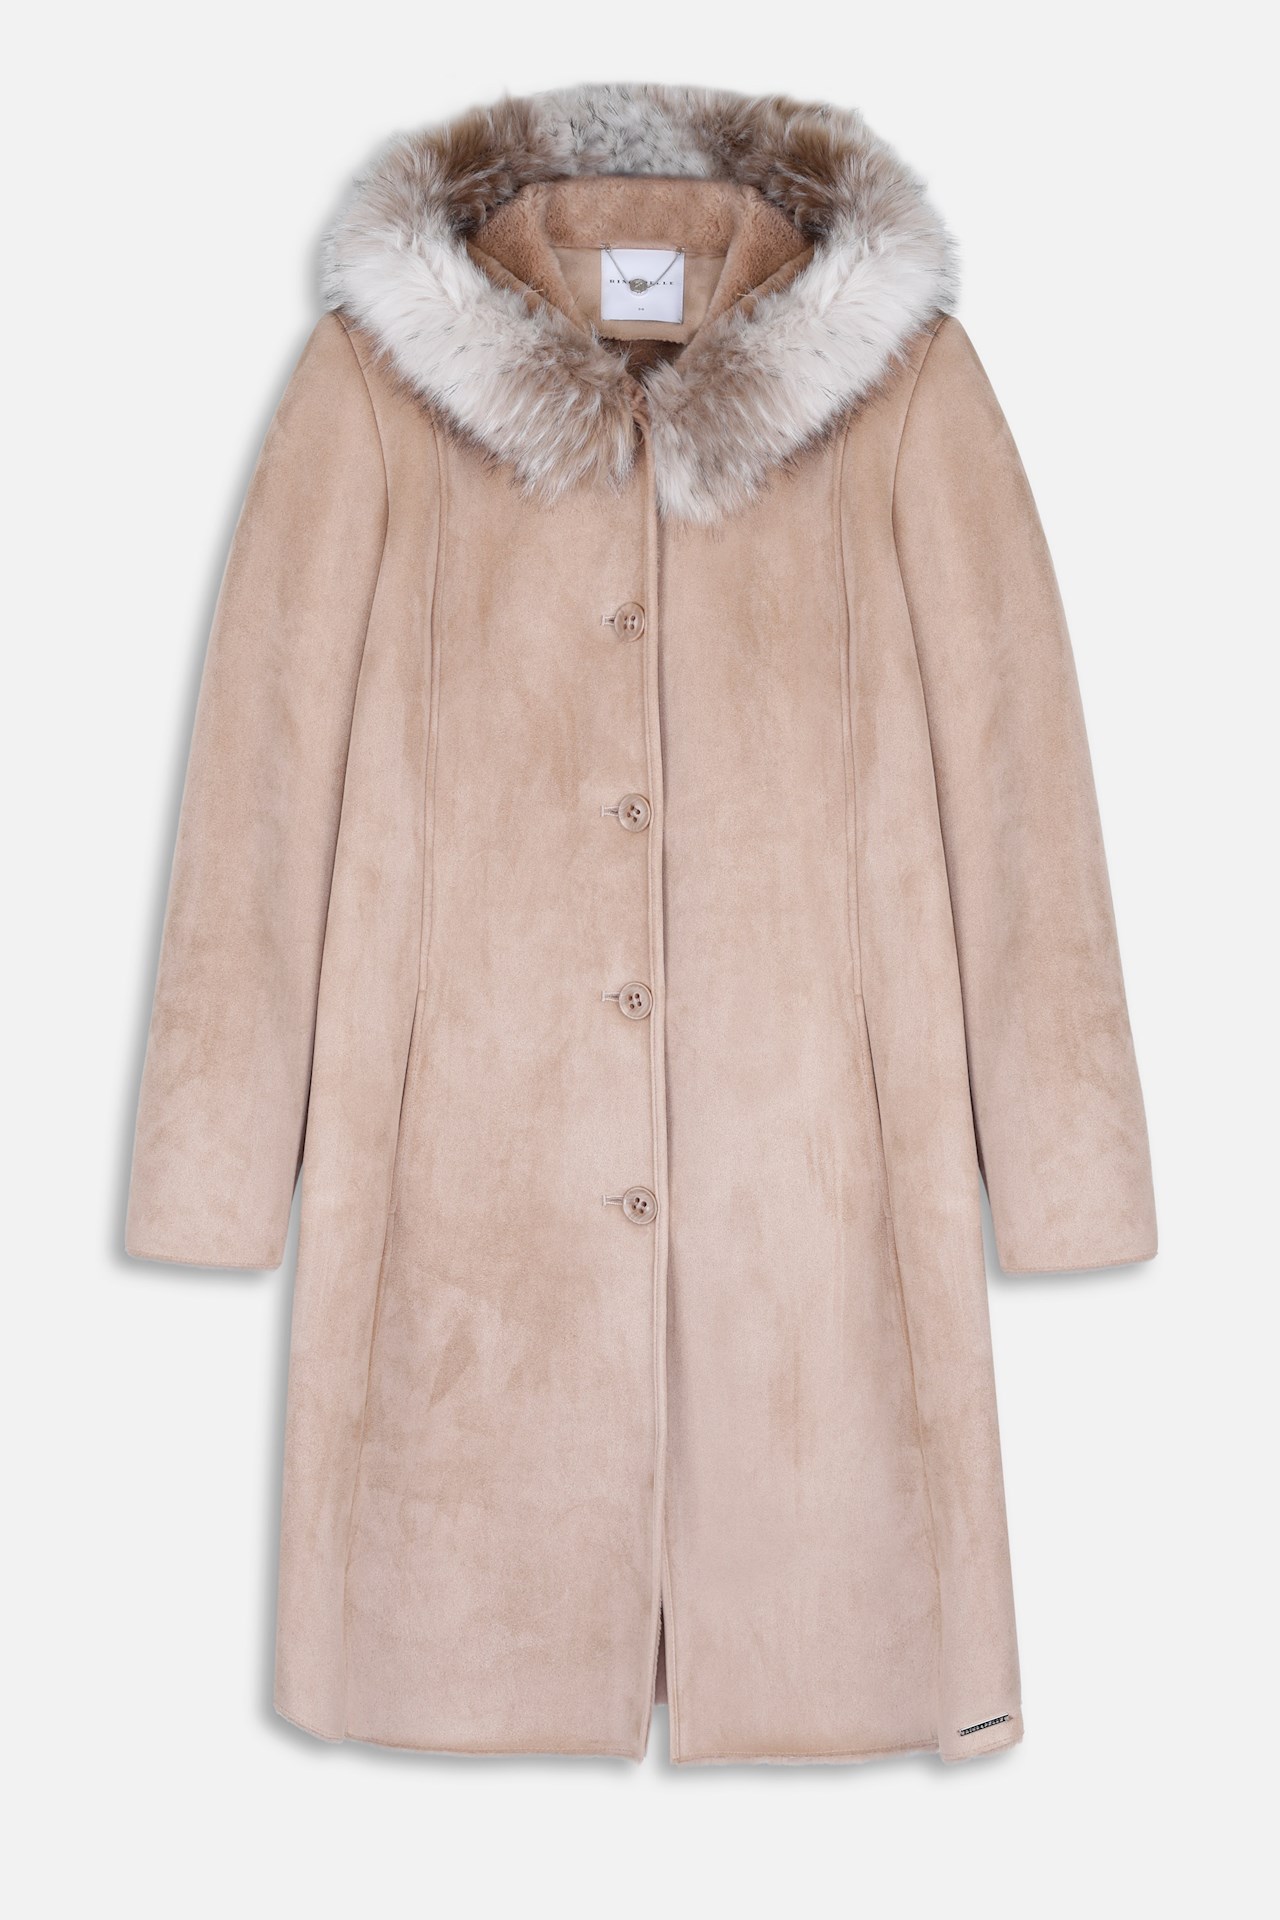 Rino&Pelle Bonded coat with faux fur collar